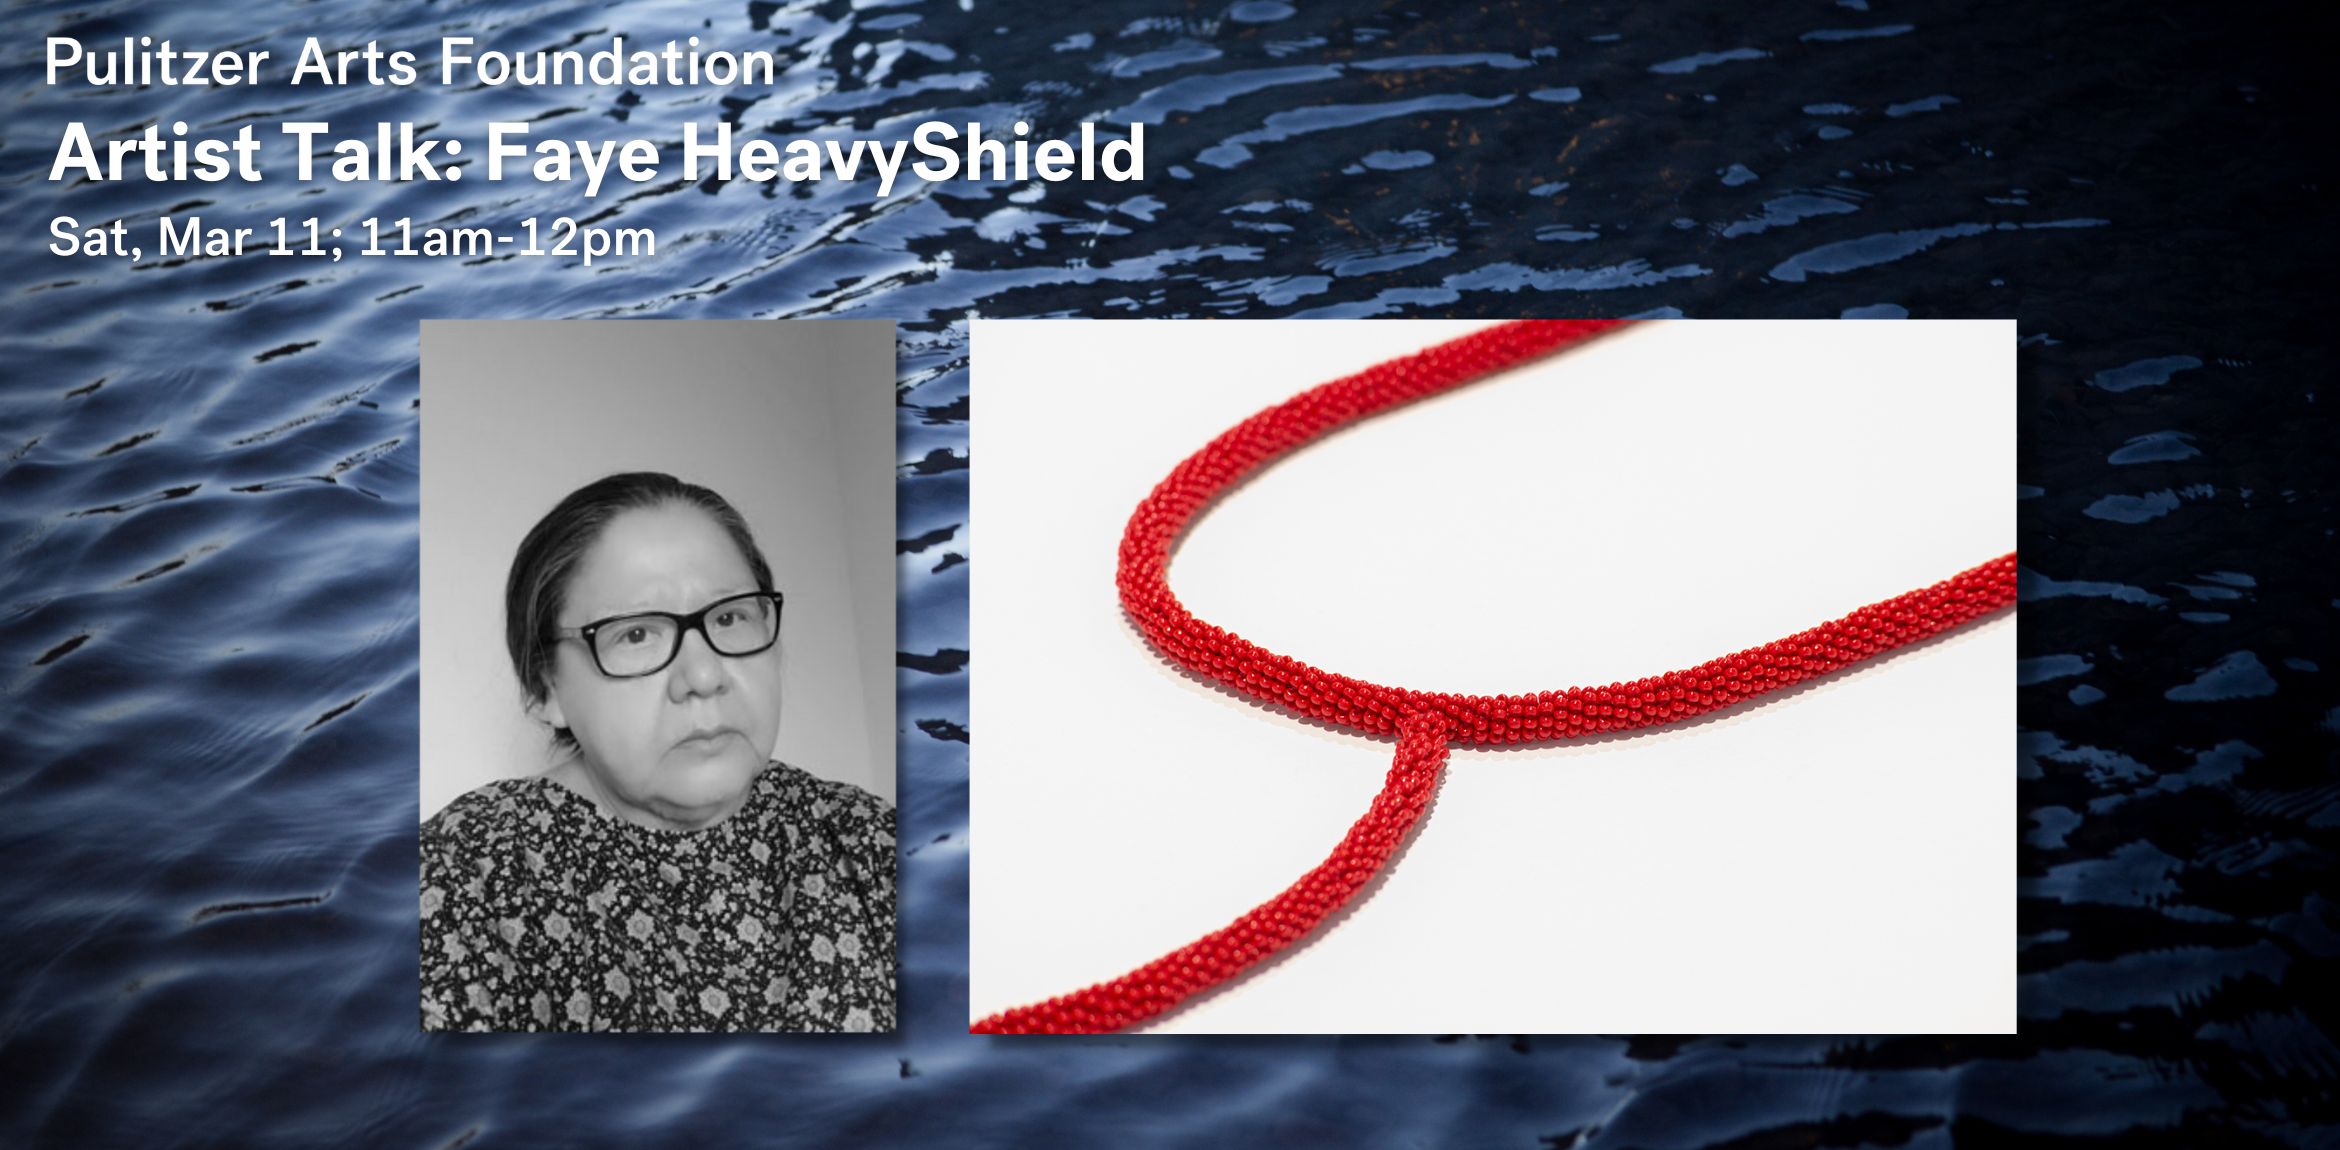 Promo image for Faye HeavyShield Artist Talk event, including red beaded artwork titled "the red line"